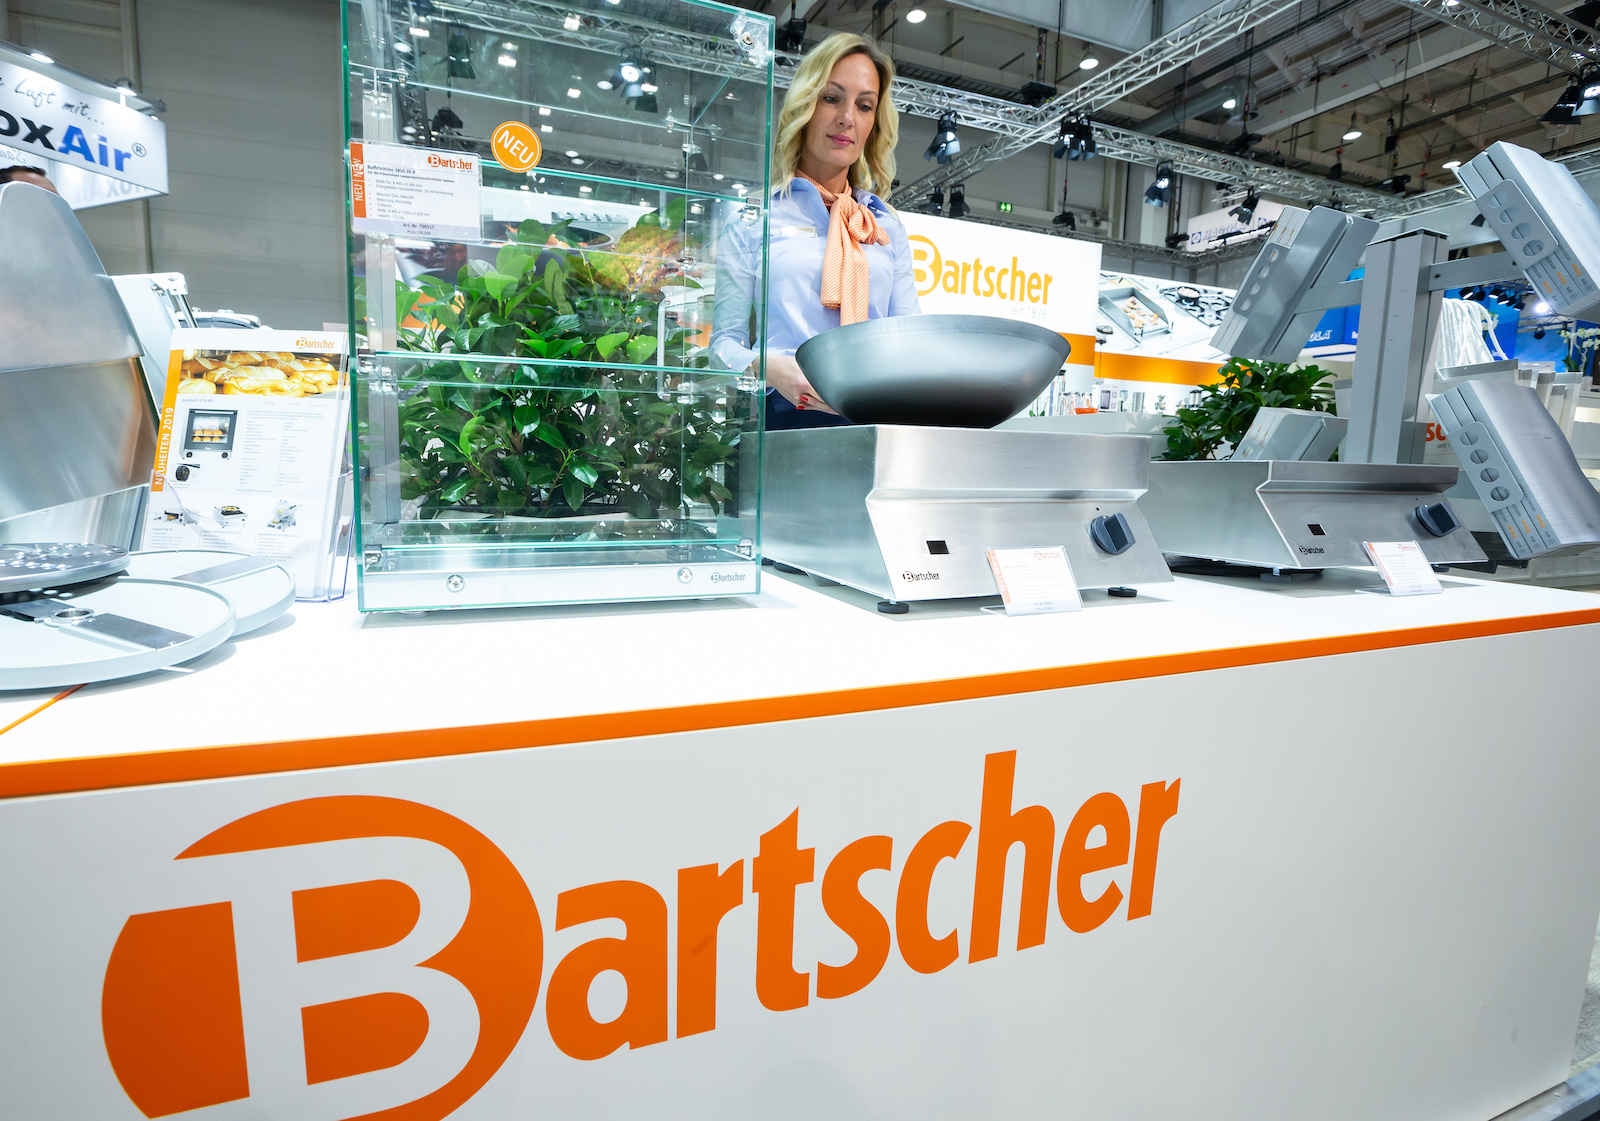 a woman stands in front of a counter labeled Bartscher holding a metal wok on a metal stand induction stove